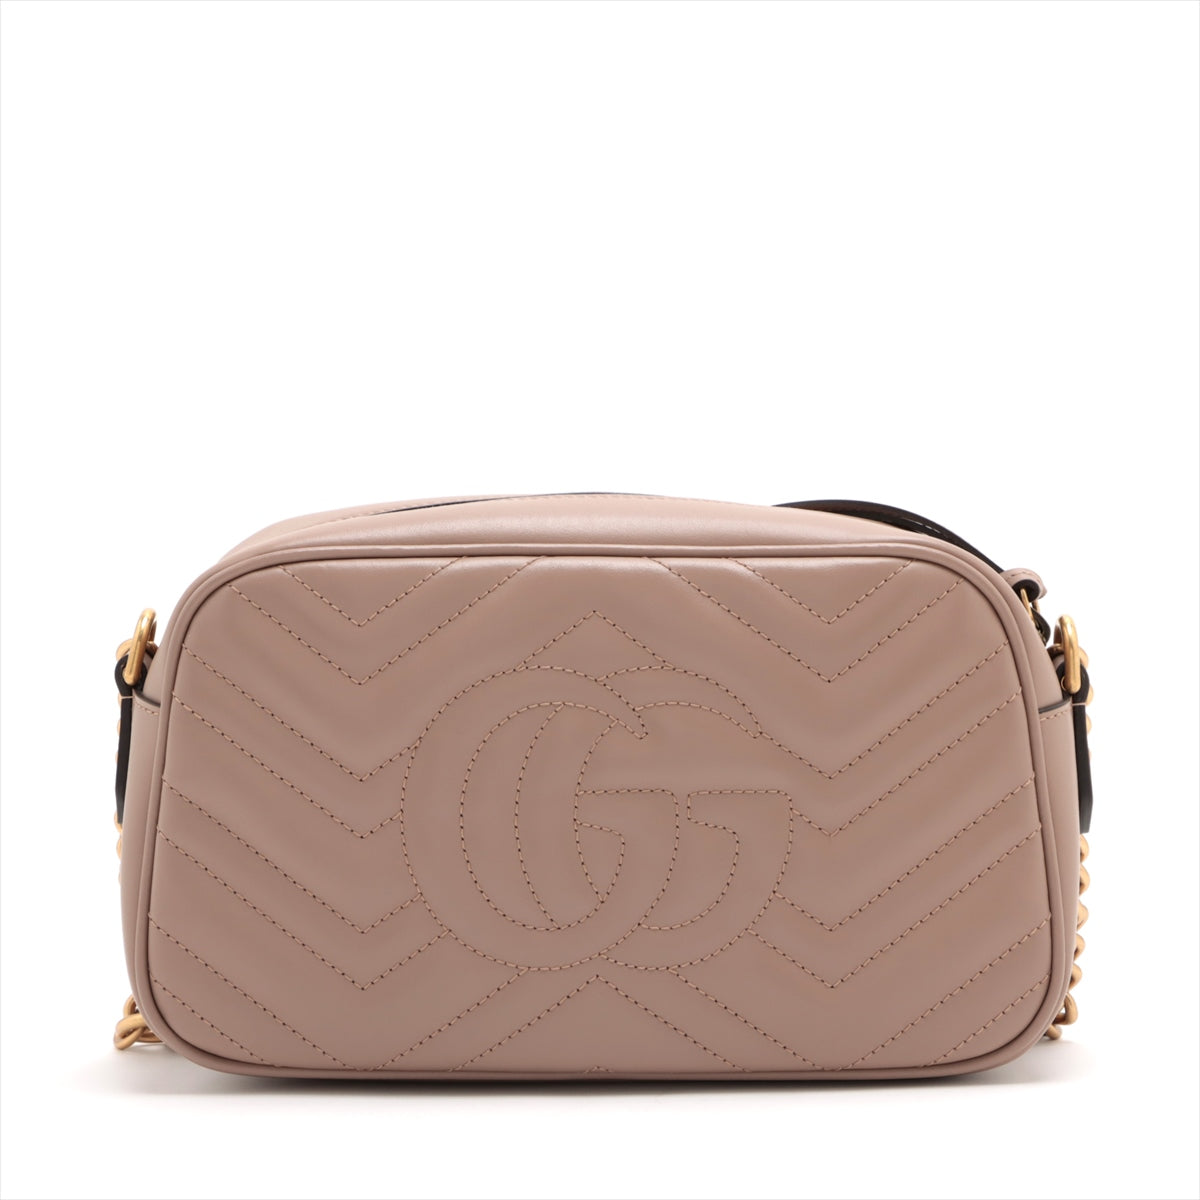 Gucci GG Marmont Leather Chain Shoulder Bag Beige 447632